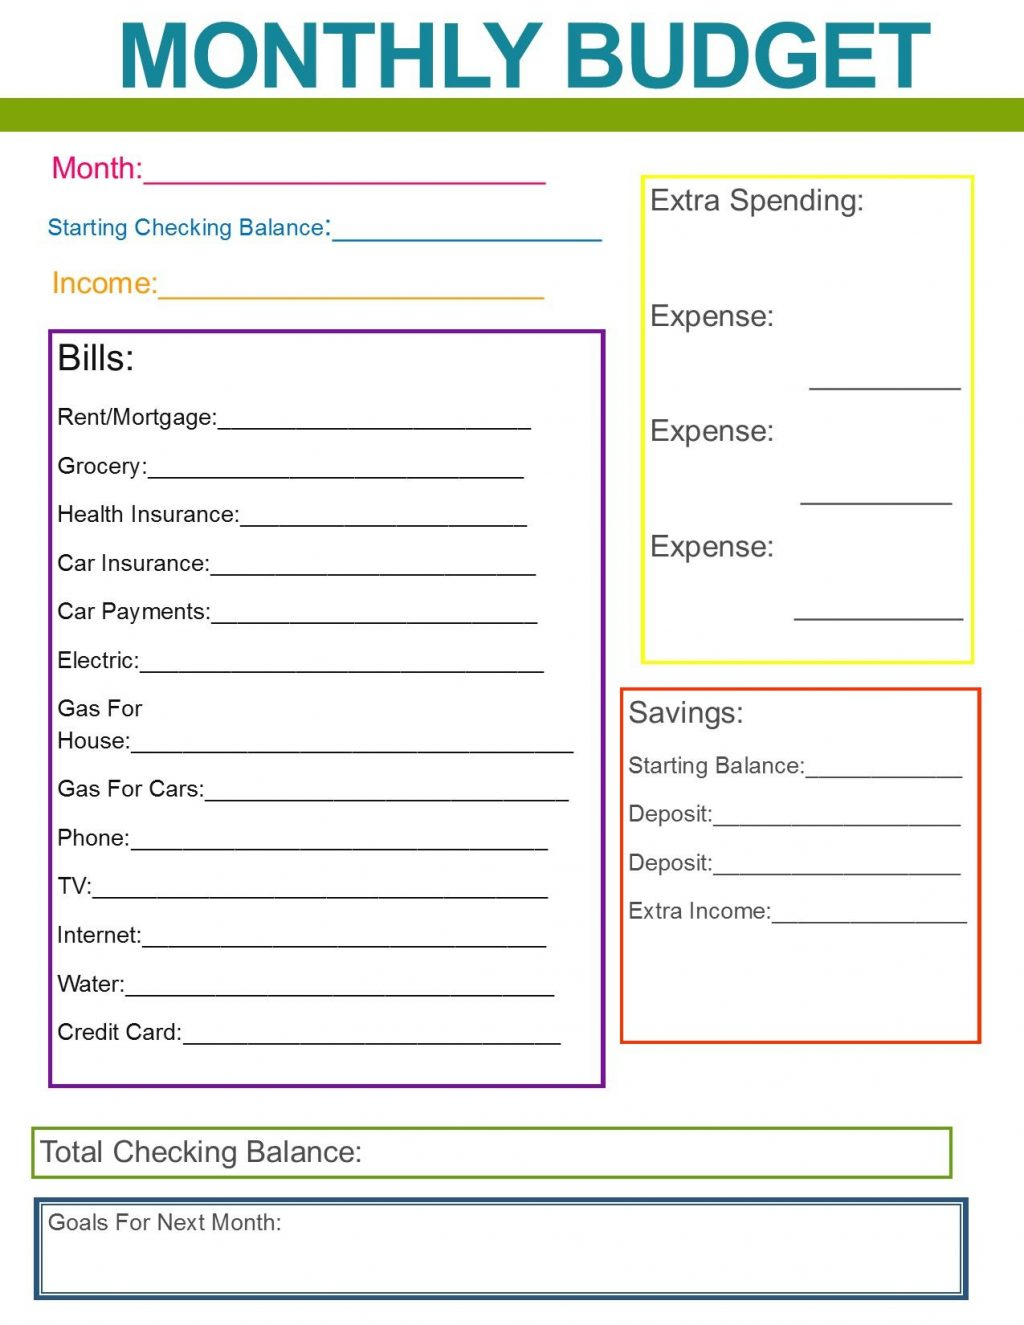 Family Monthly Expenses Spreadsheet Throughout Family Monthly Budget Spreadsheet Excel Simple Worksheet Template Nz